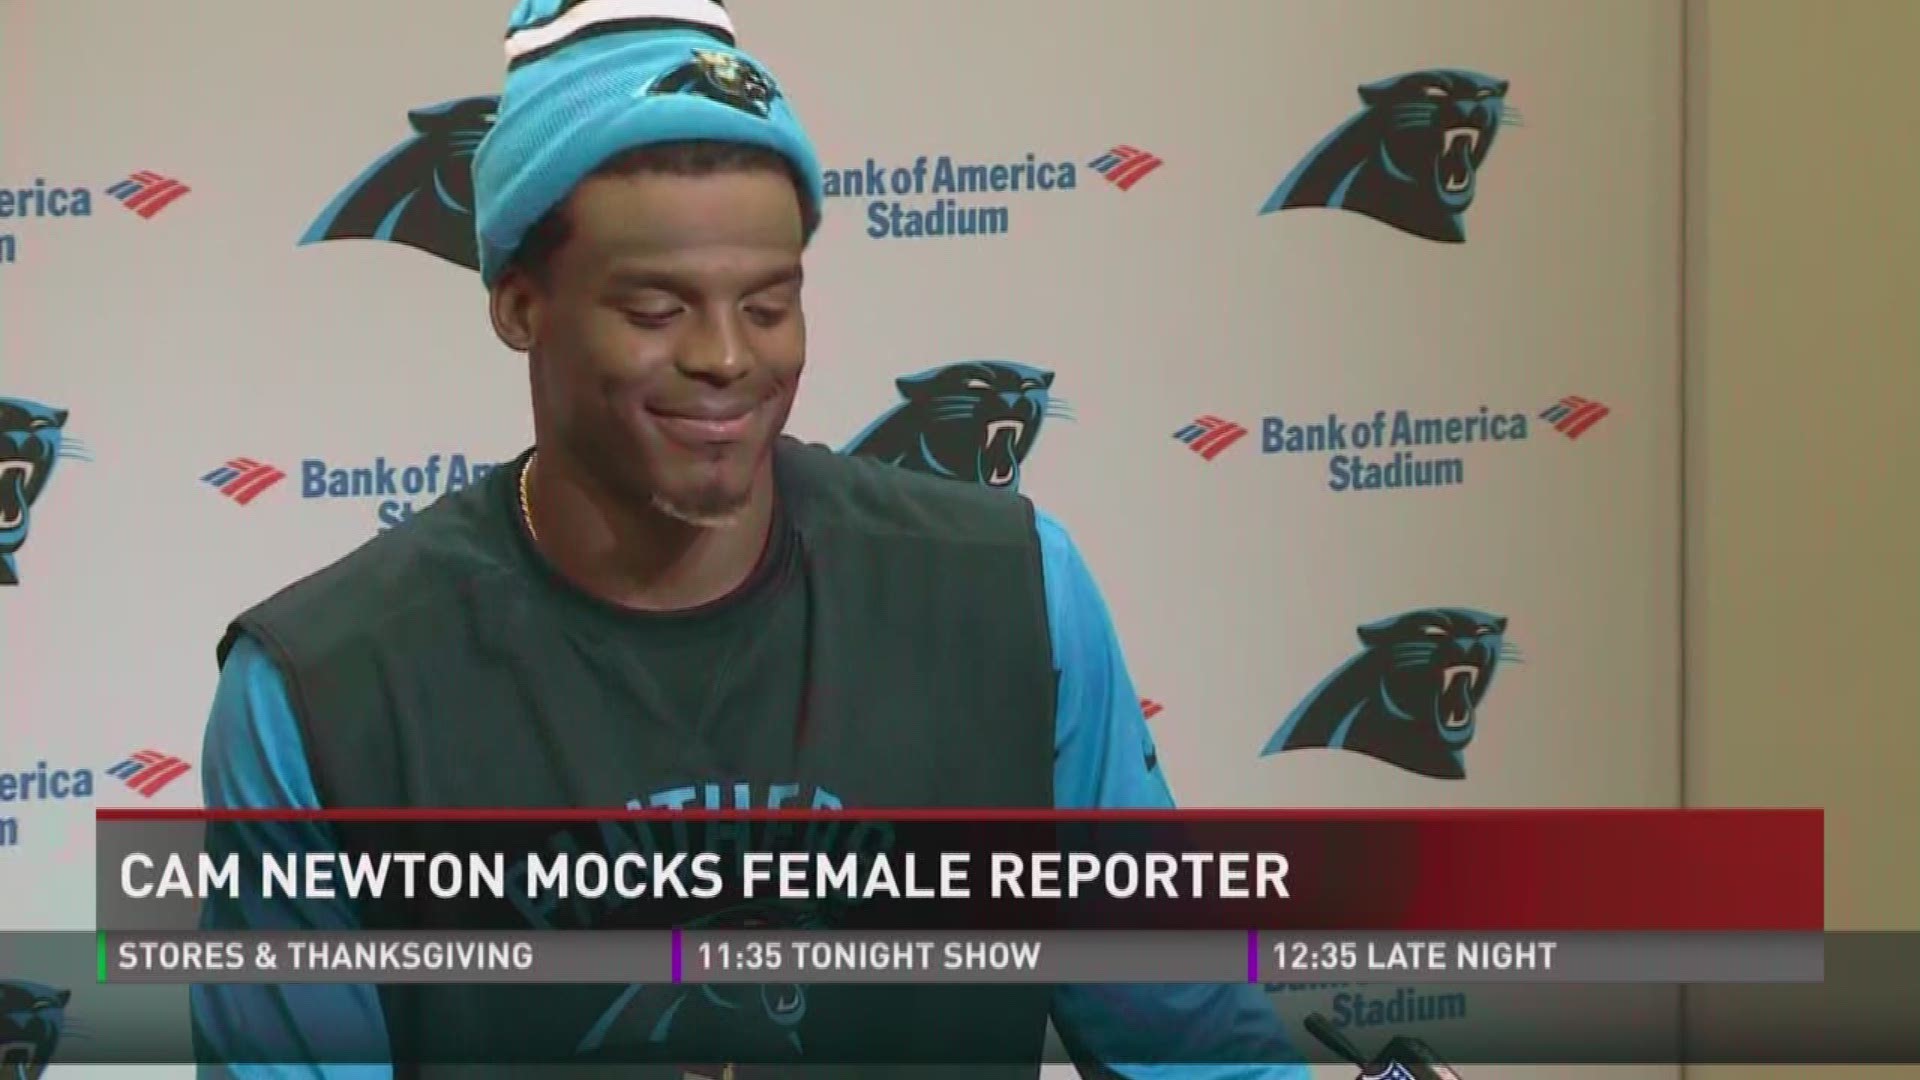 Cam Newton mocks female reporter during a press conference.